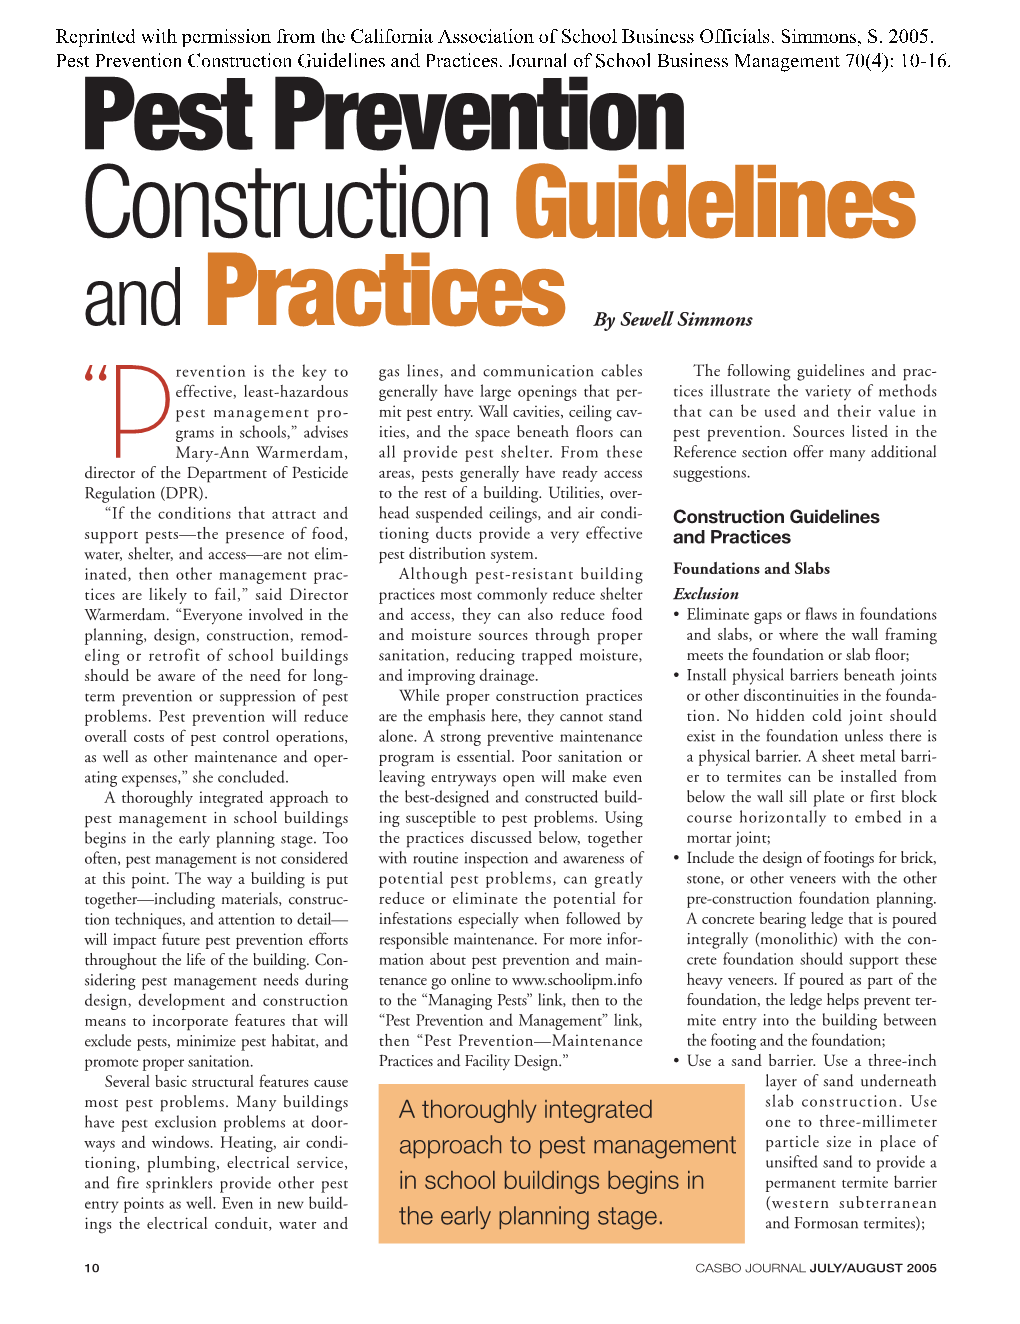 Pest Prevention Construction Guidelines and Practices